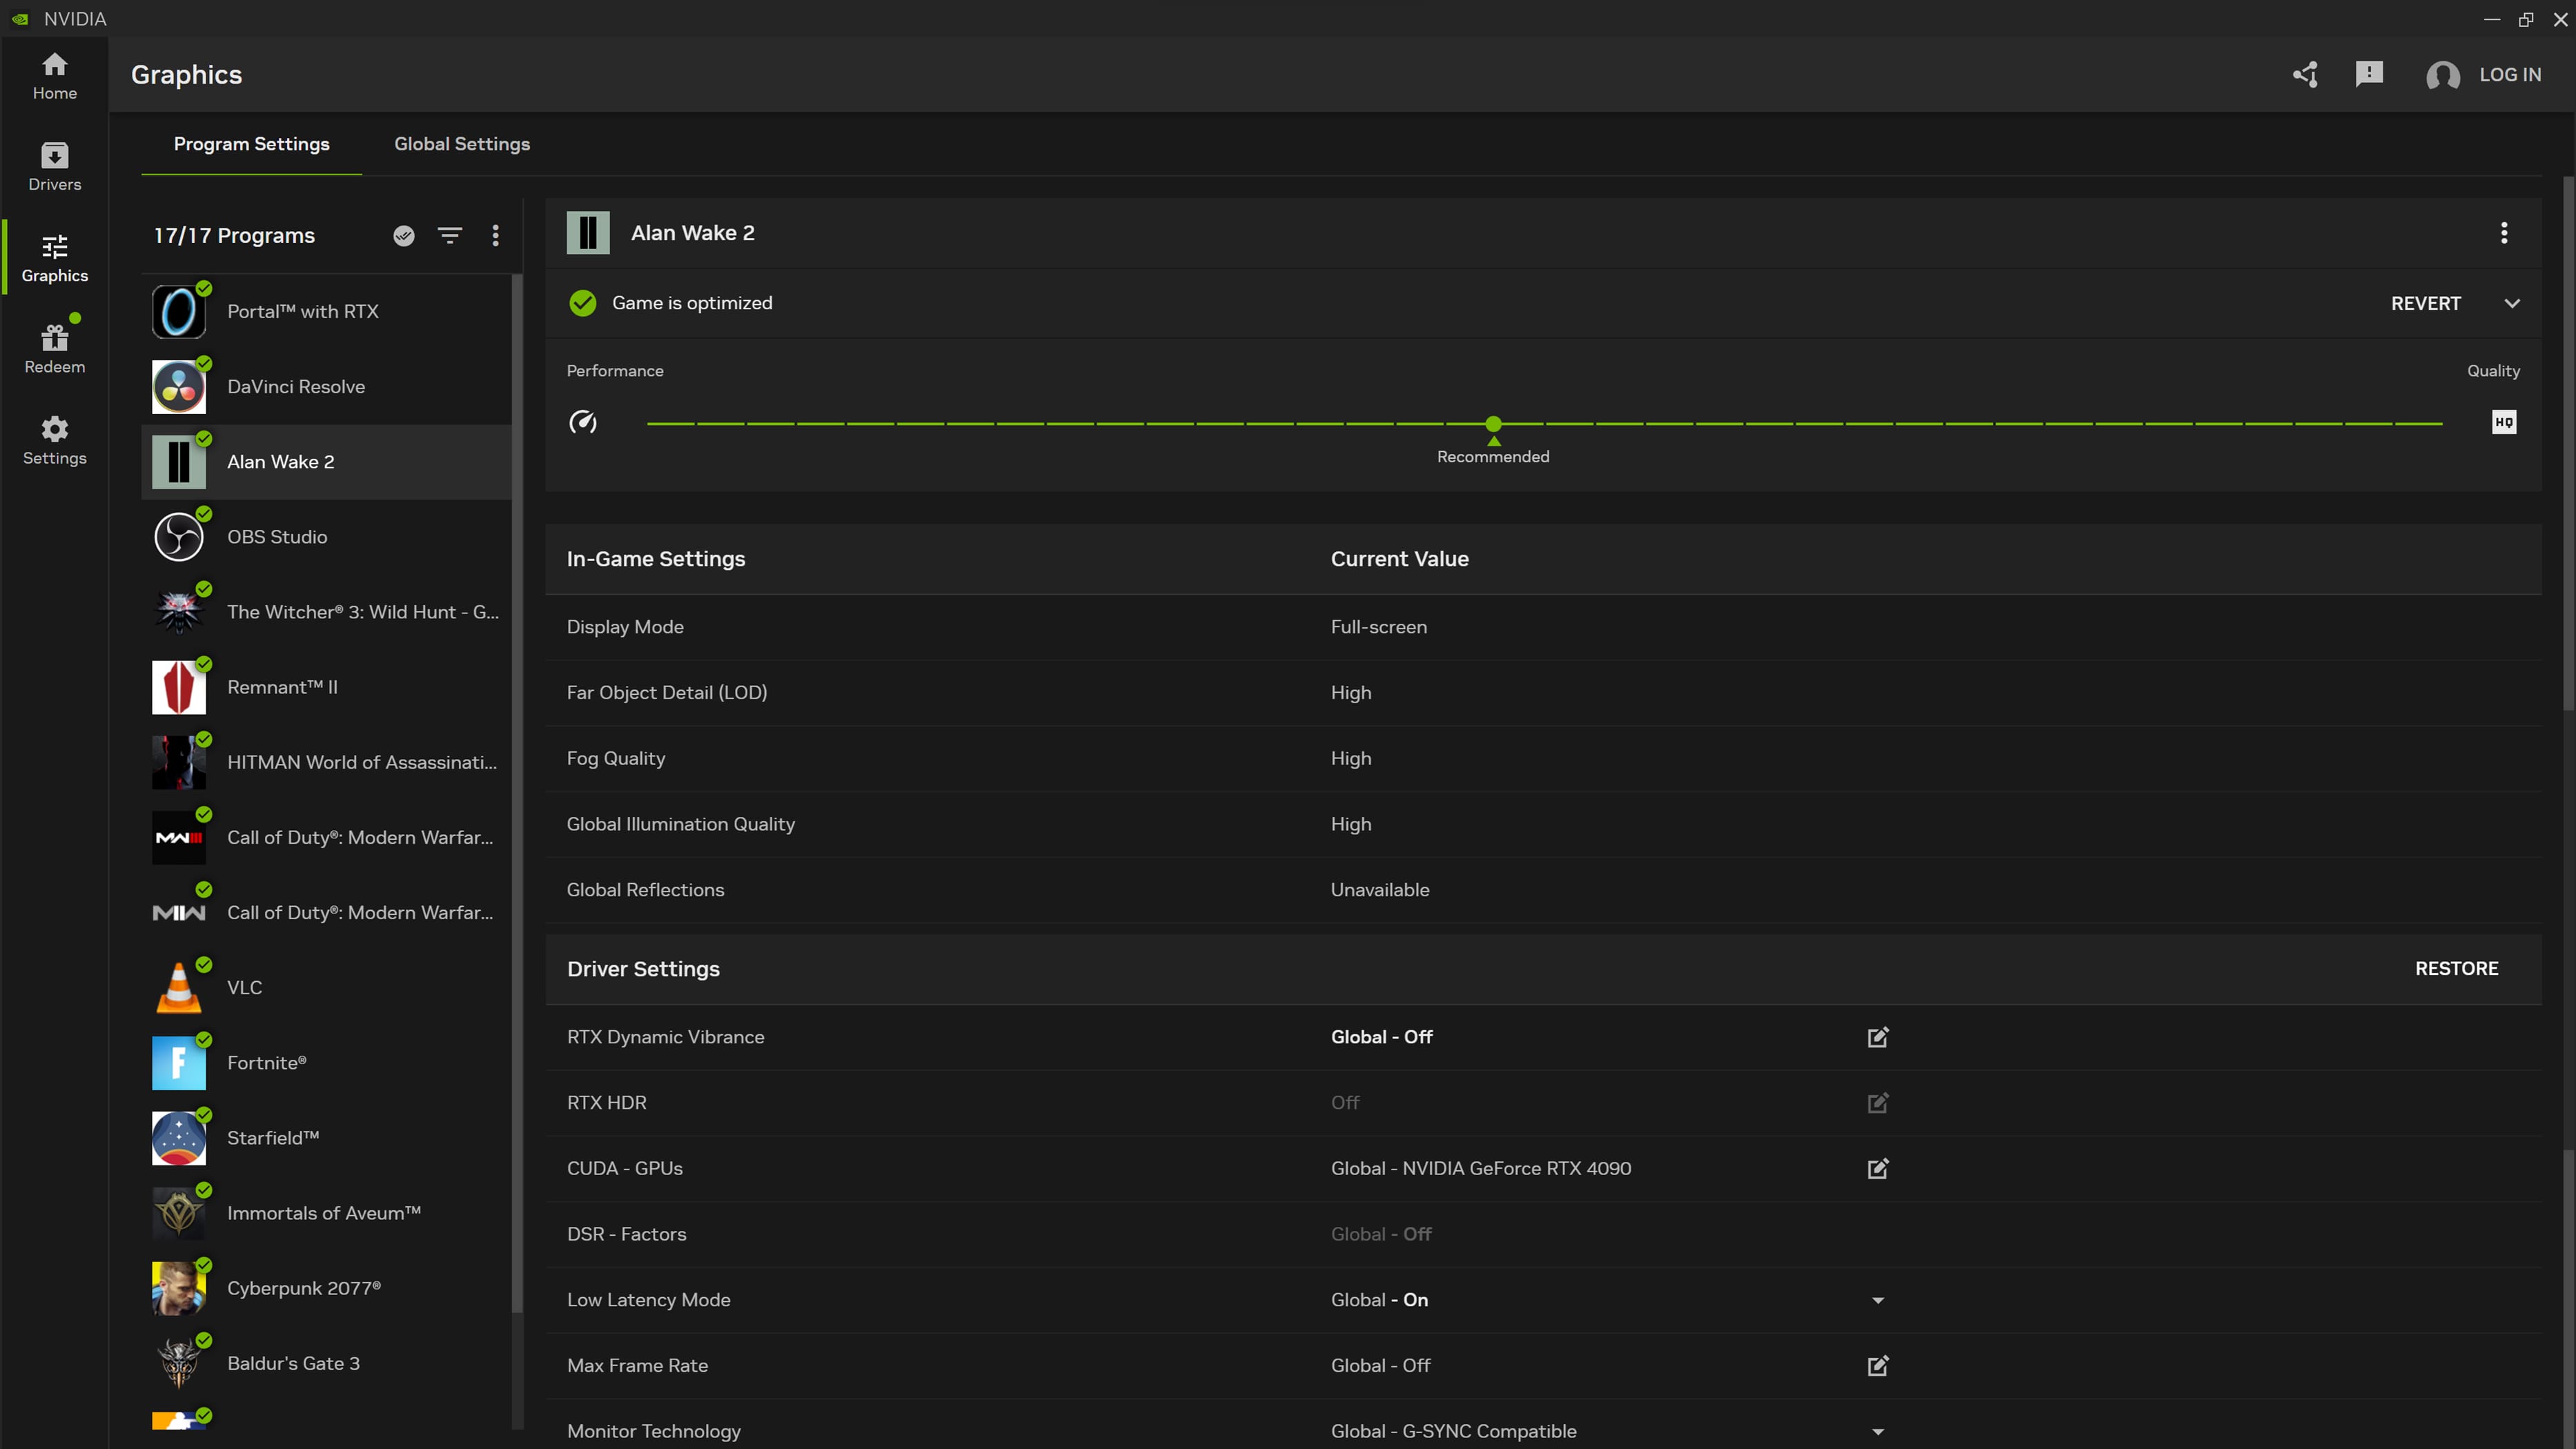 nvidia-app-graphics-and-settings-section.jpg